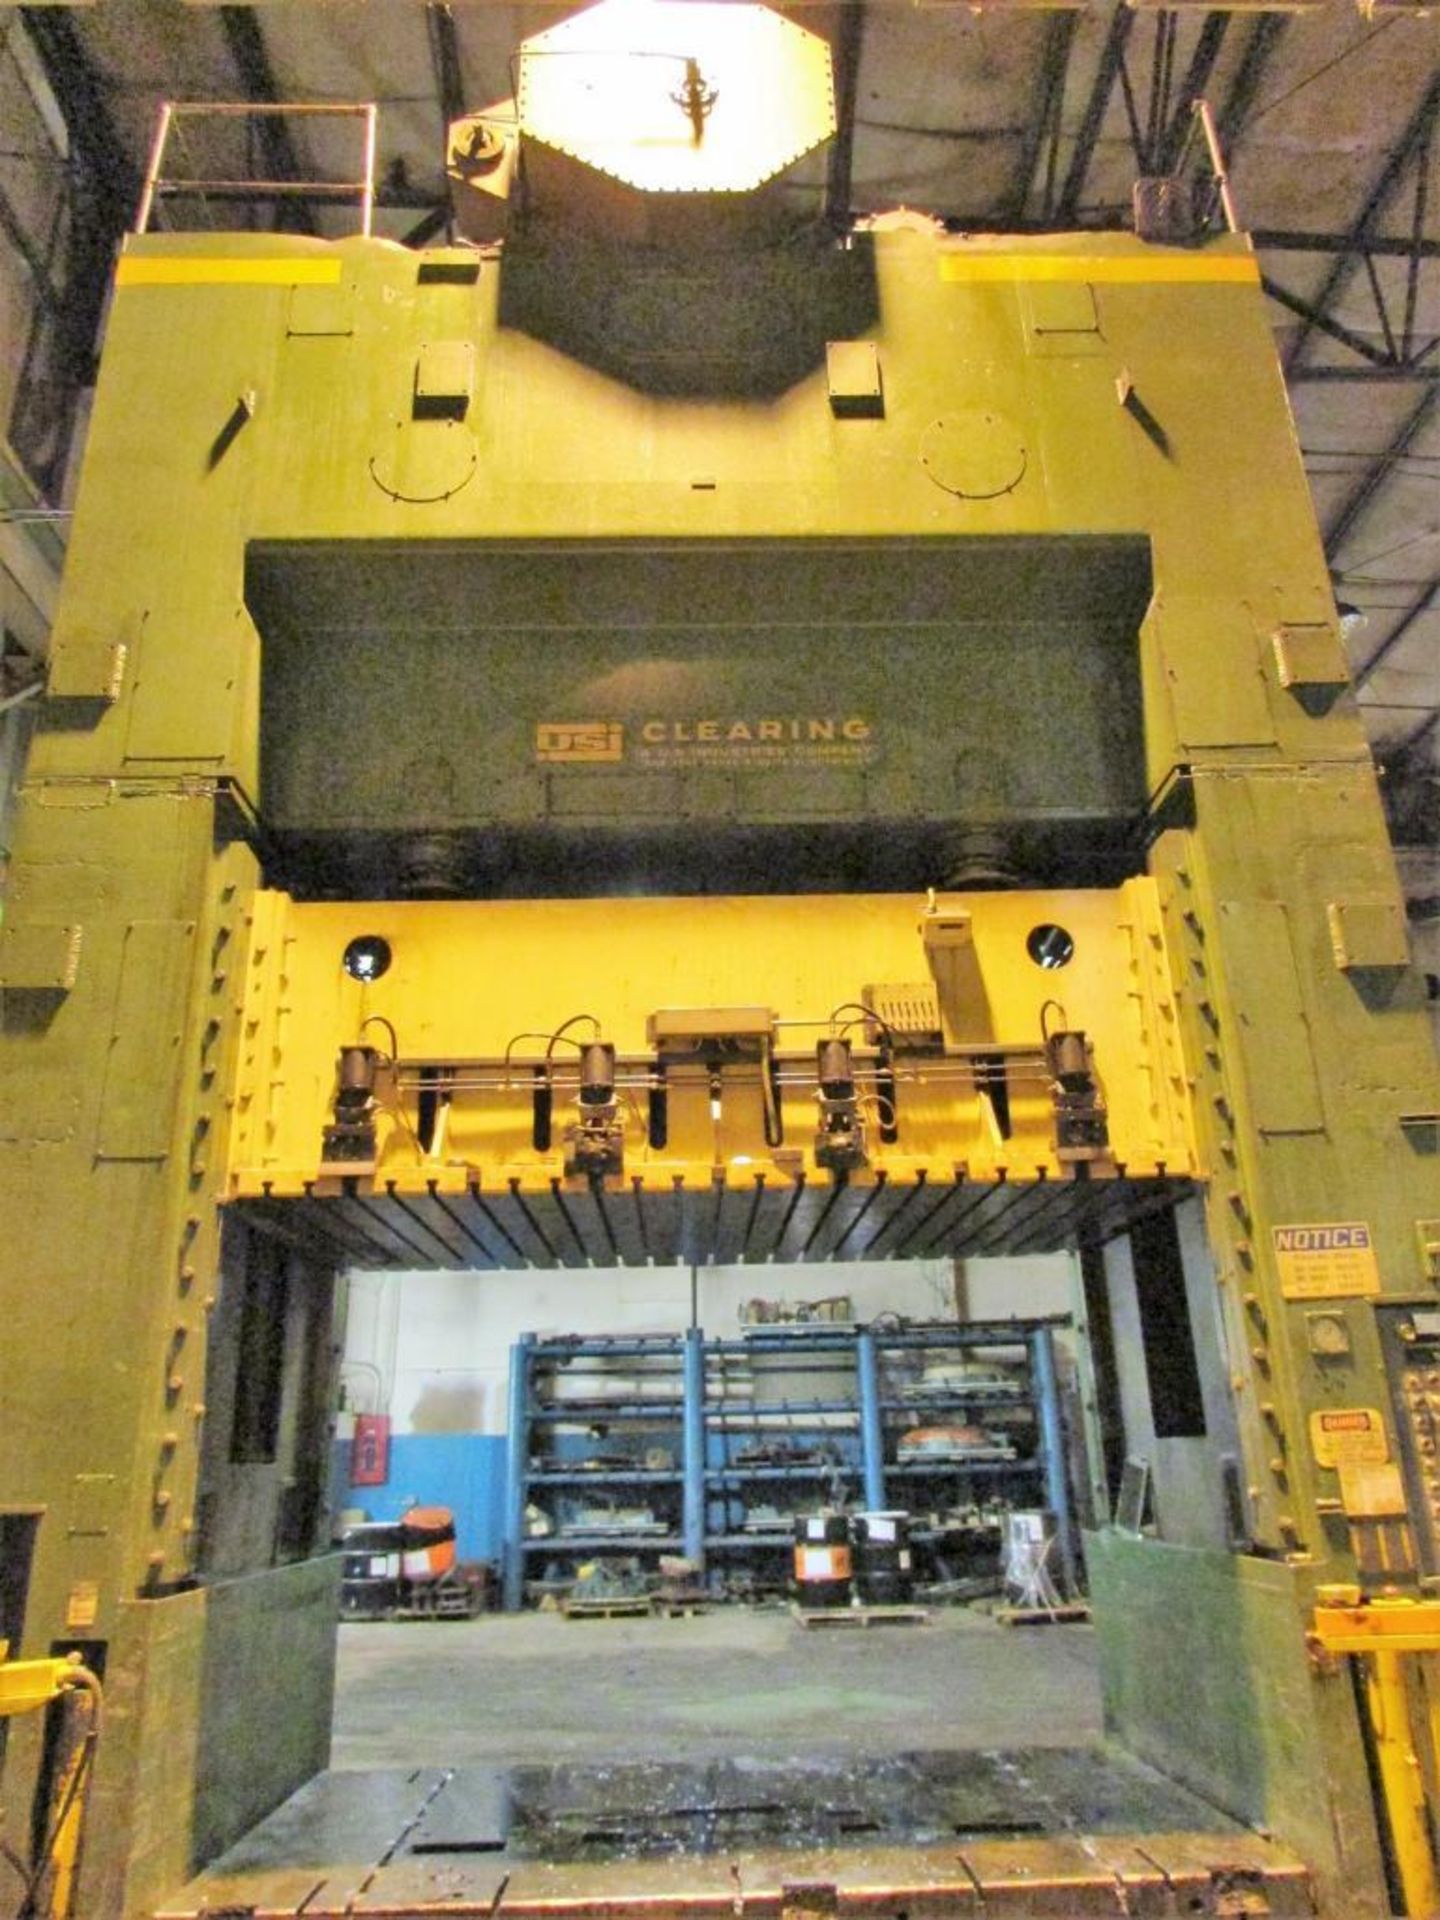 USI Clearing SE4-500-144-84 500 Ton Four Point Straight Side Press - Image 2 of 18